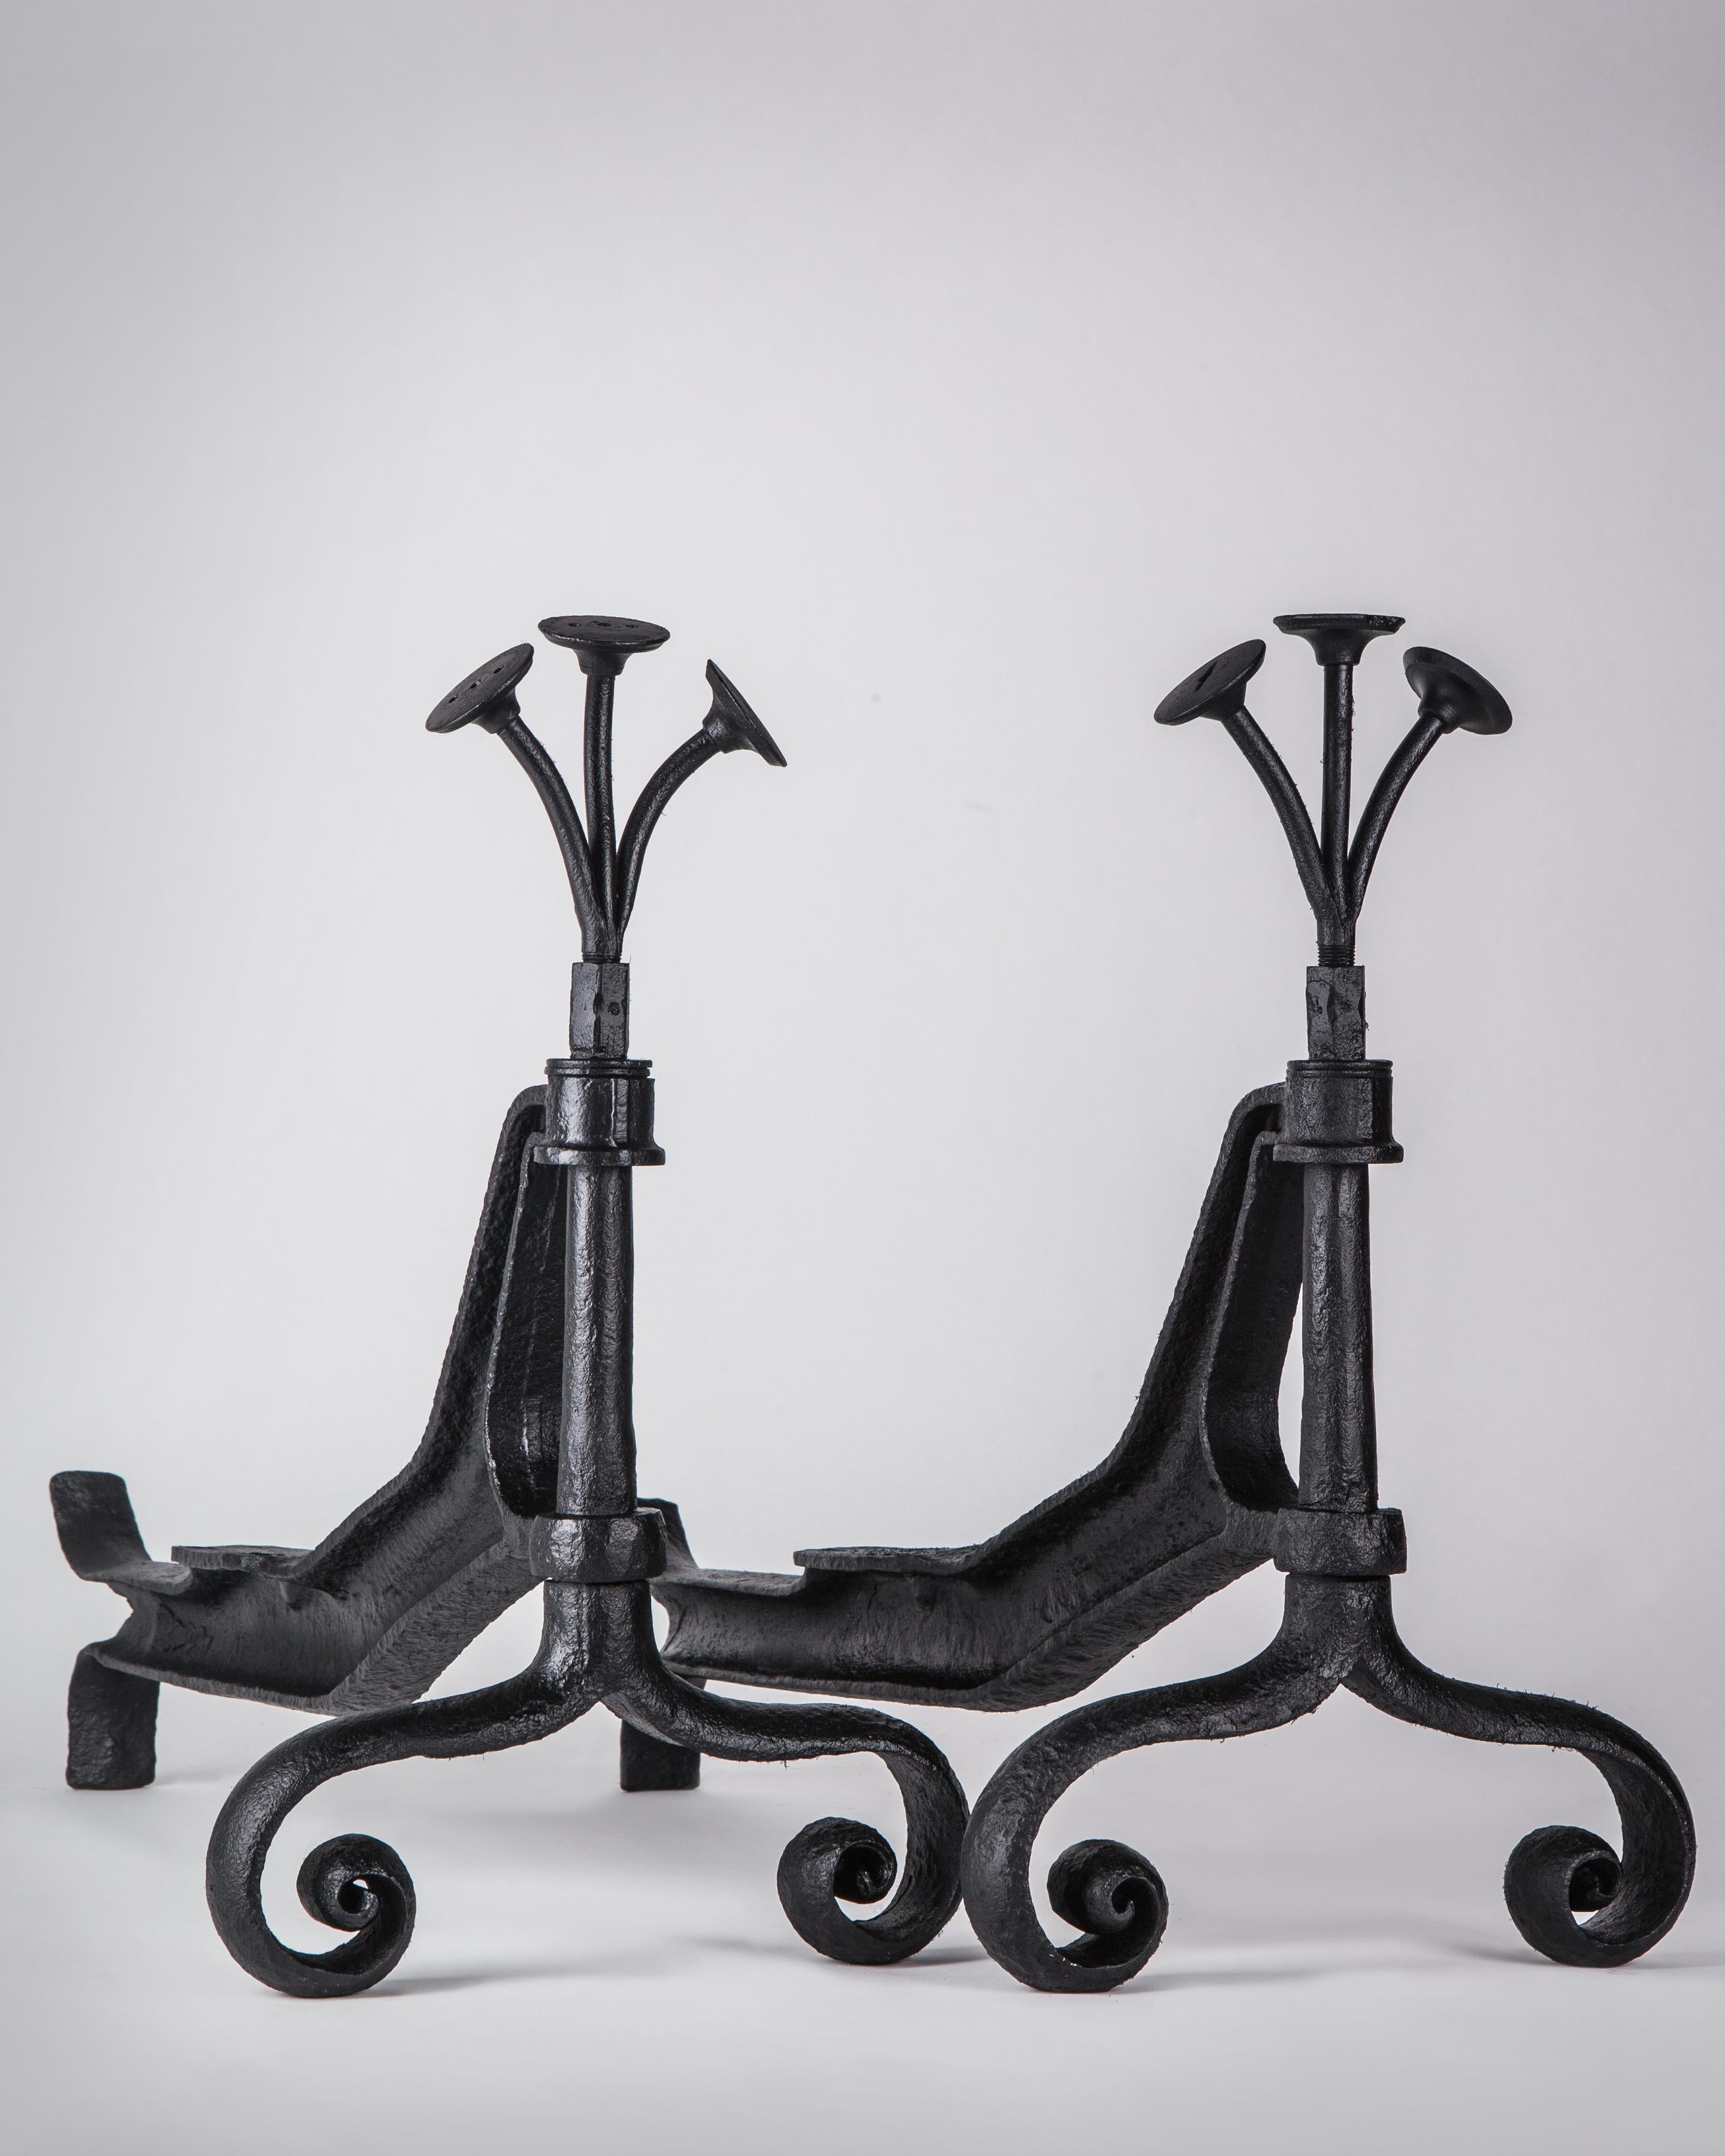 AFP0598
A pair of vintage andirons, made in the folk art style with truck axles, topped with a bouquet of engine valve stems and terminating in scrolled feet. The iron in a blackened finish. Circa 1940s.

Dimensions:
Overall: 18